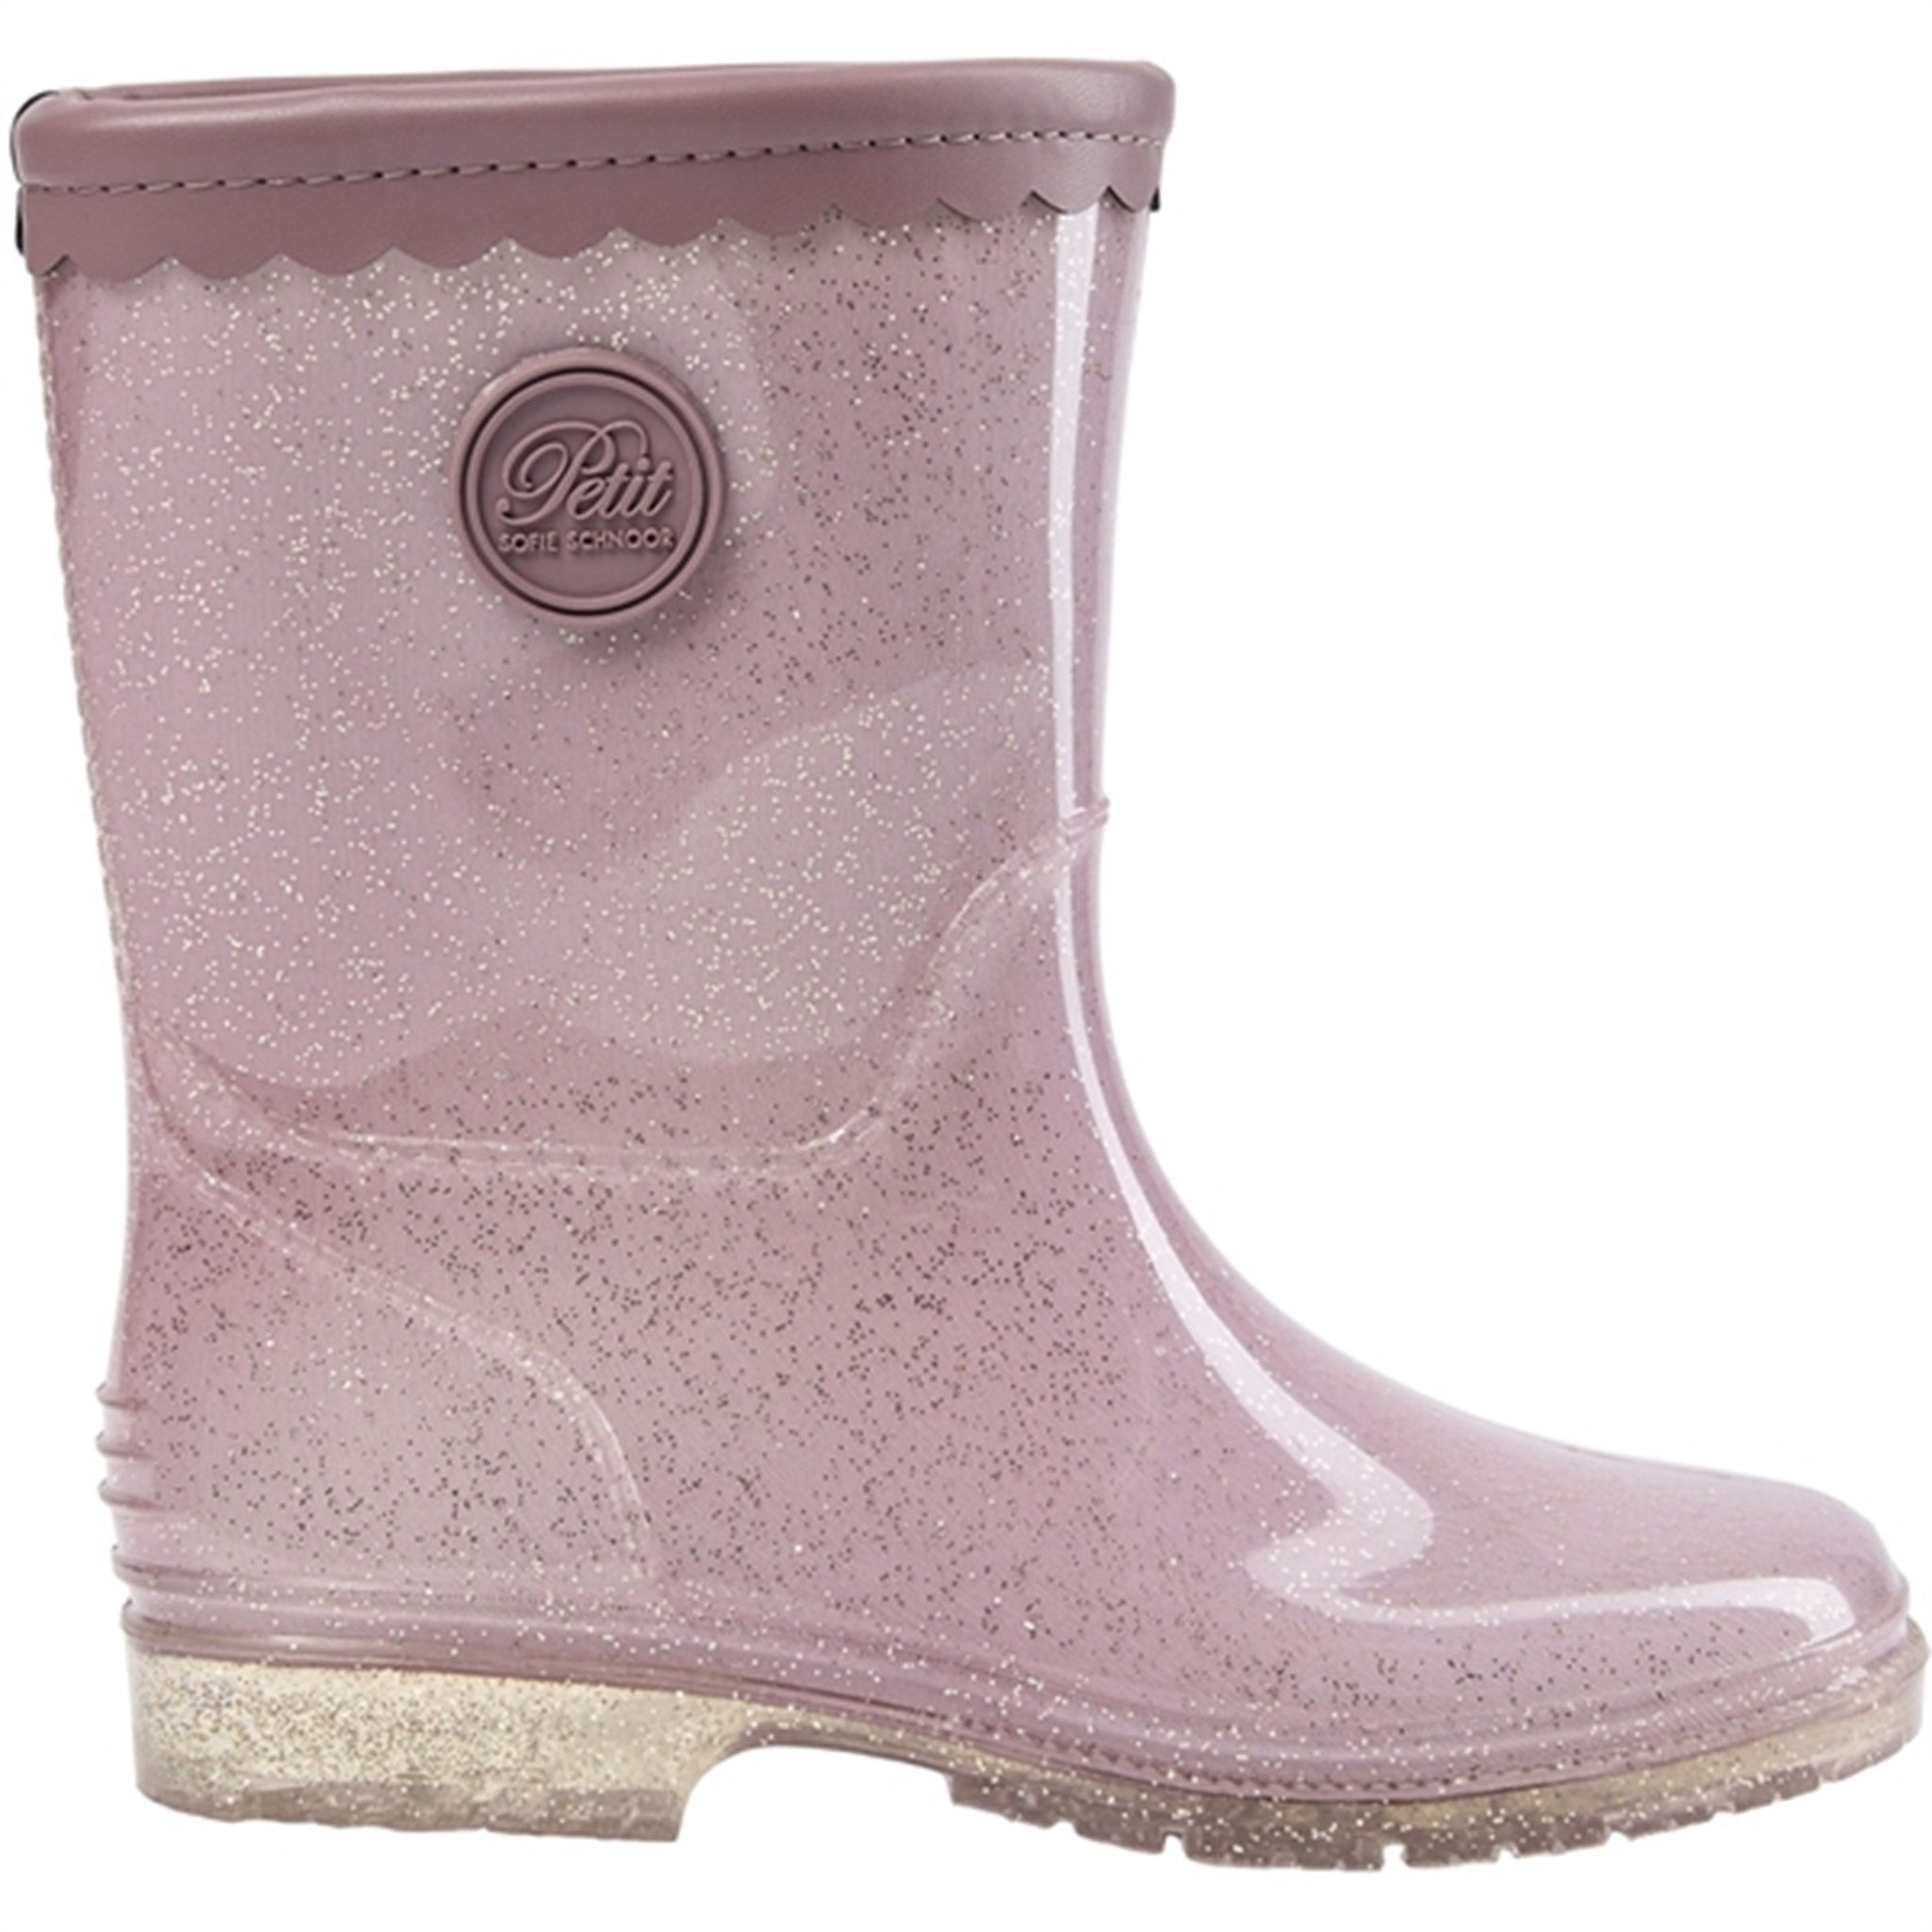 Petit By Sofie Schnoor Light Purple Rubber Boots